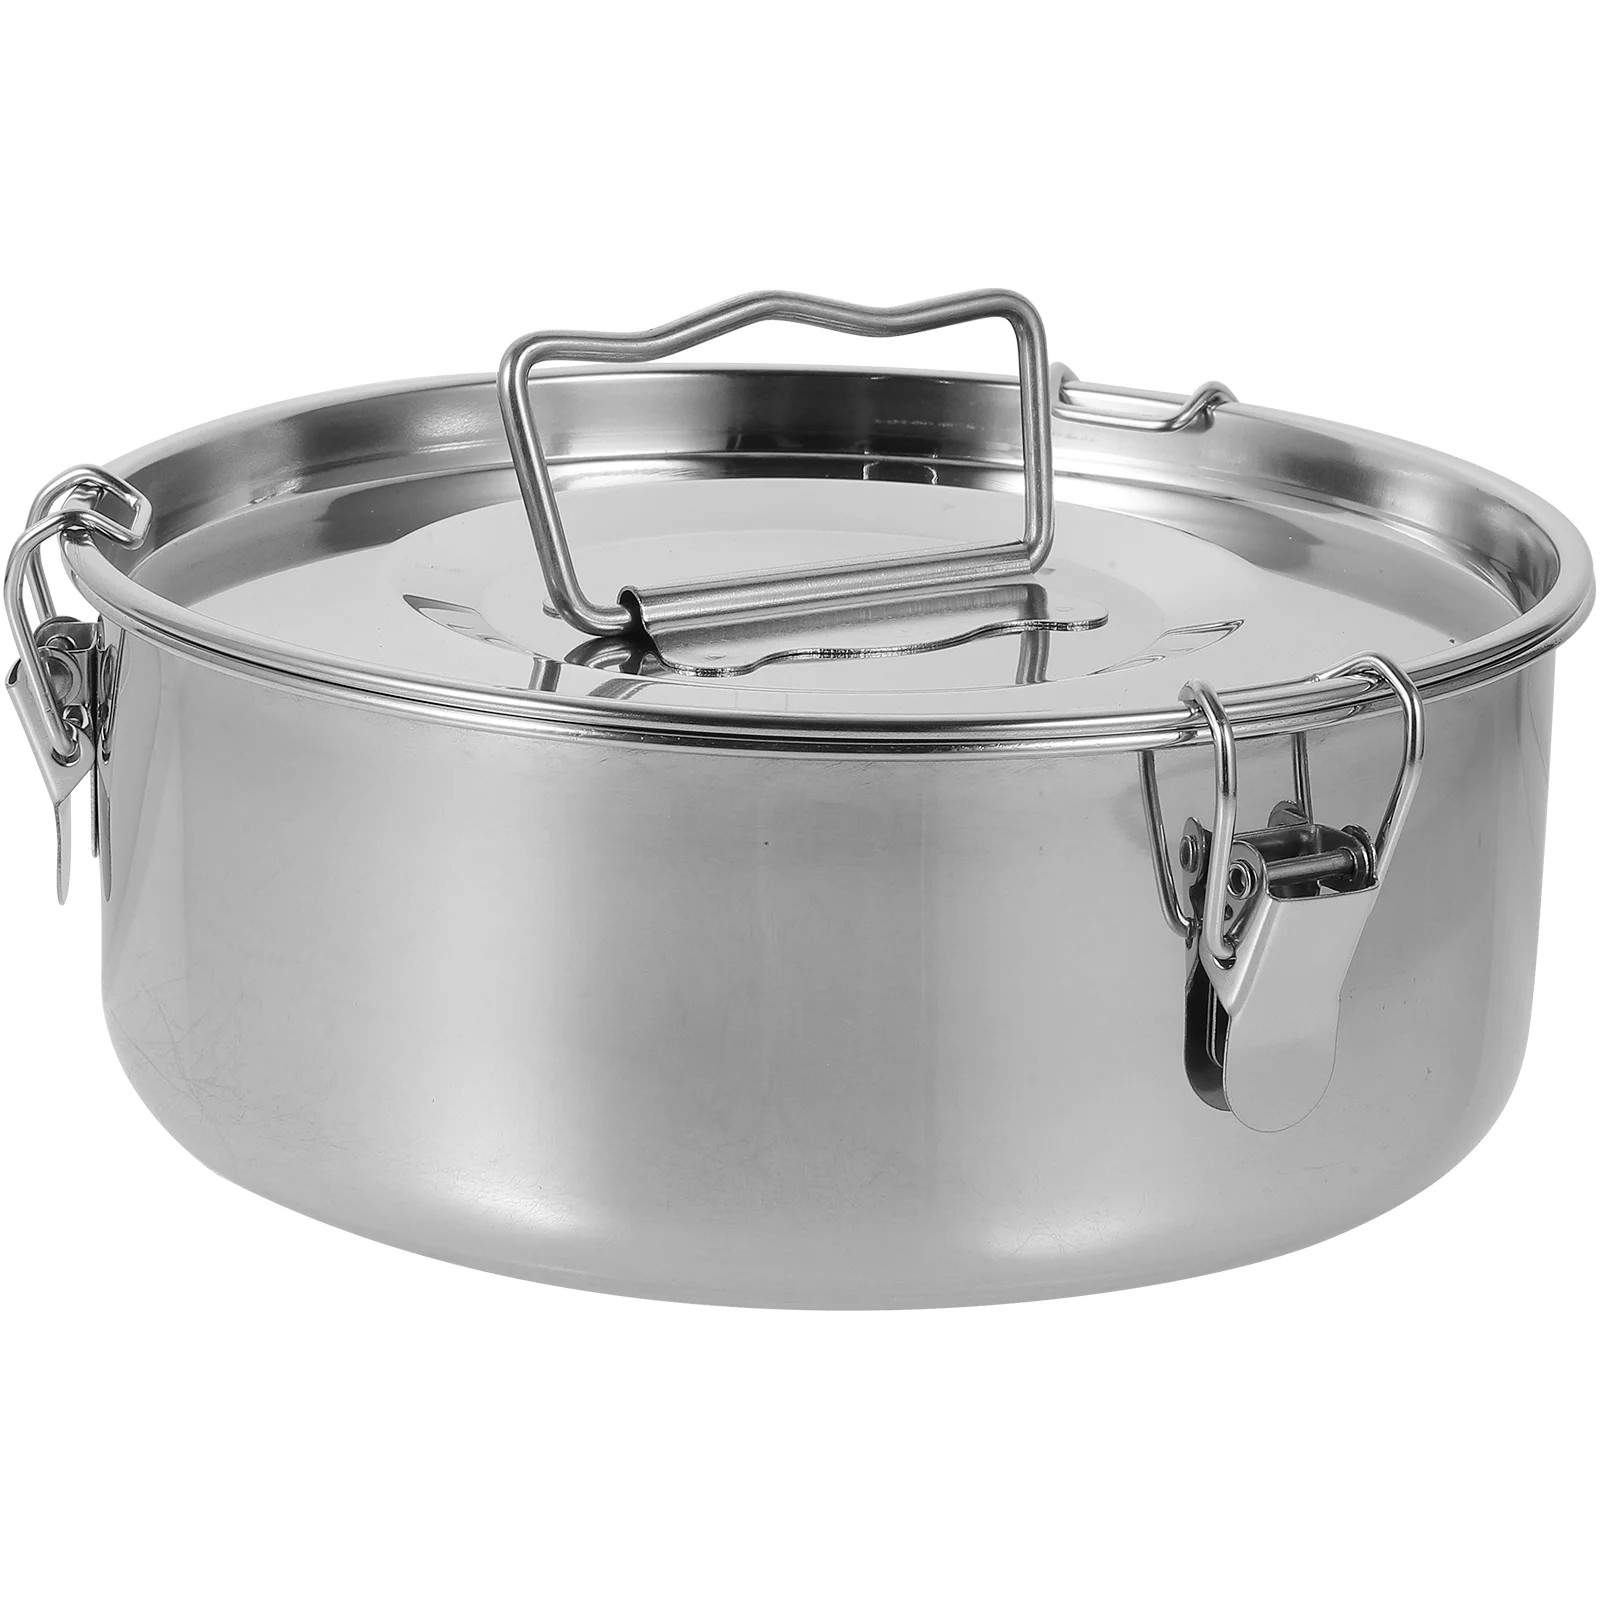 

Food Steaming Pot Soup Kitchen Cookware Steamer Flan Mold with Lid Cake Toast Bread Pan Cooking Flan Container DIY Baking Tools